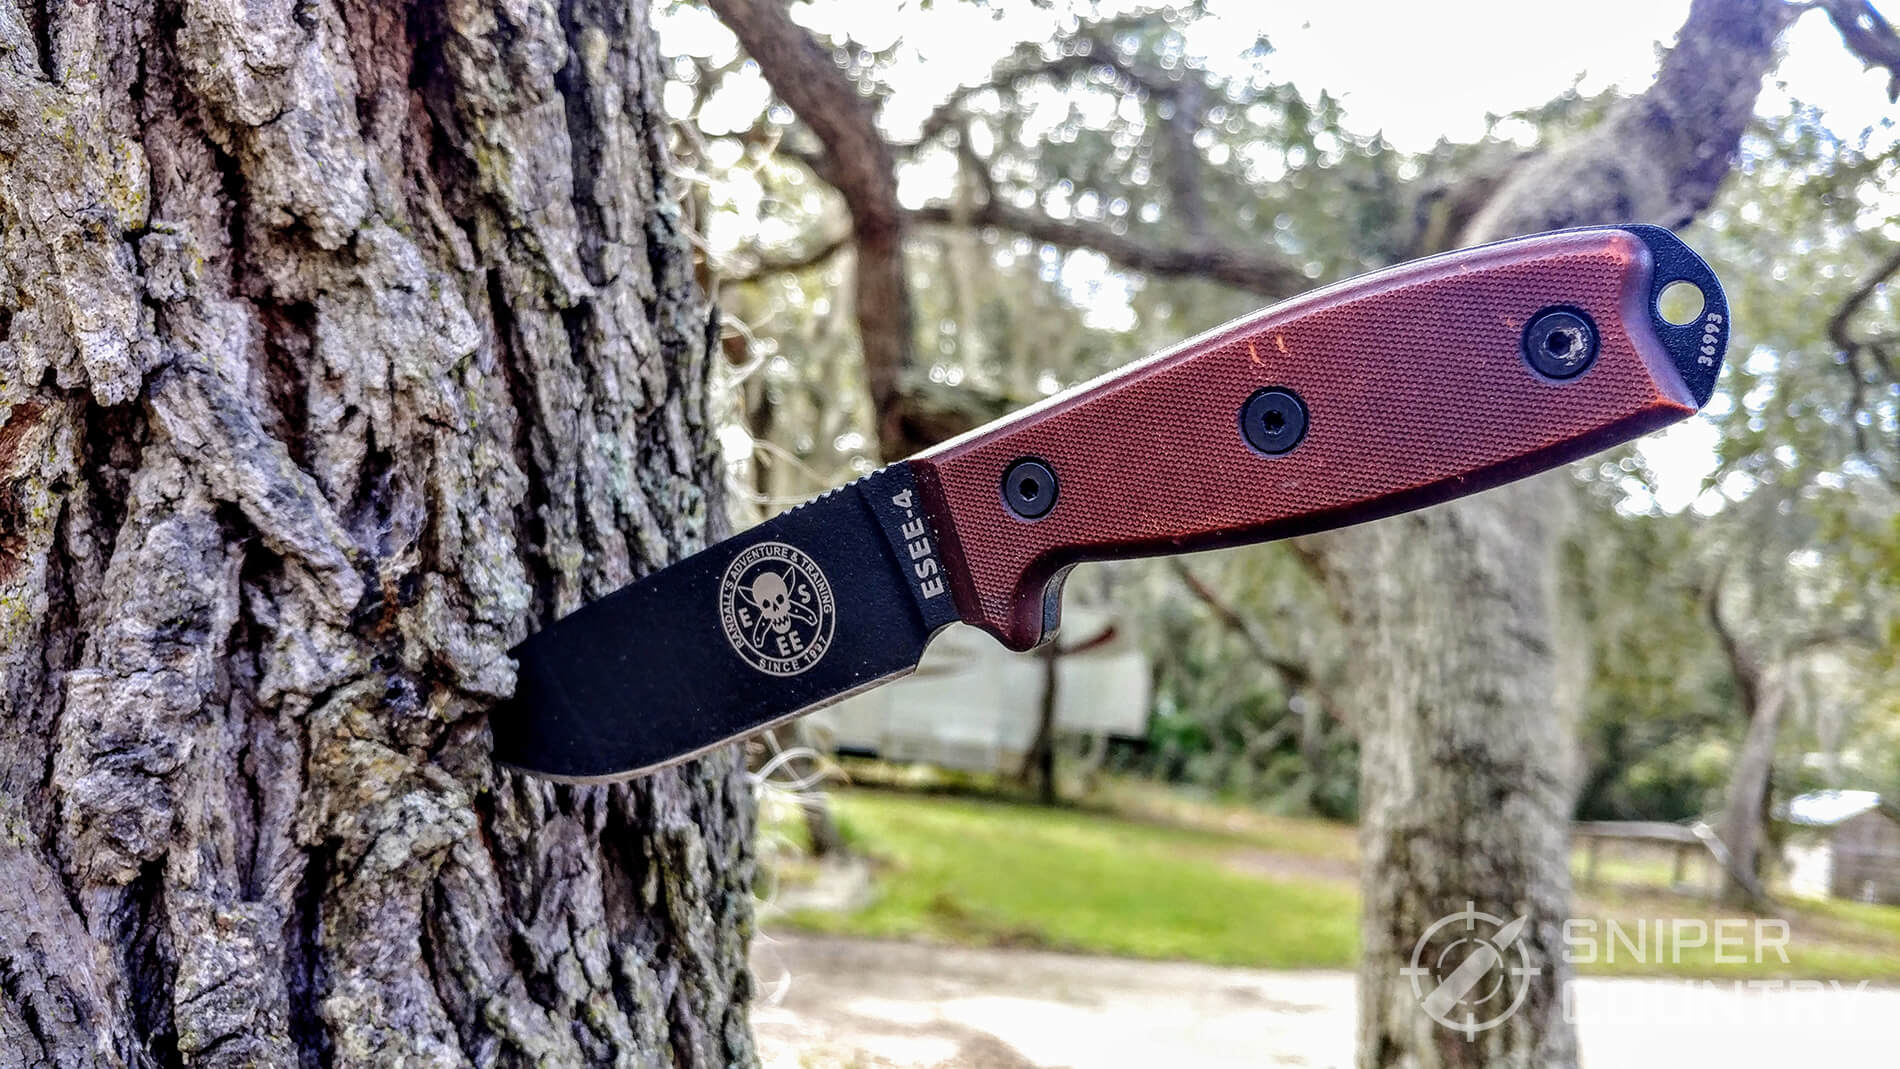 The Esee 4